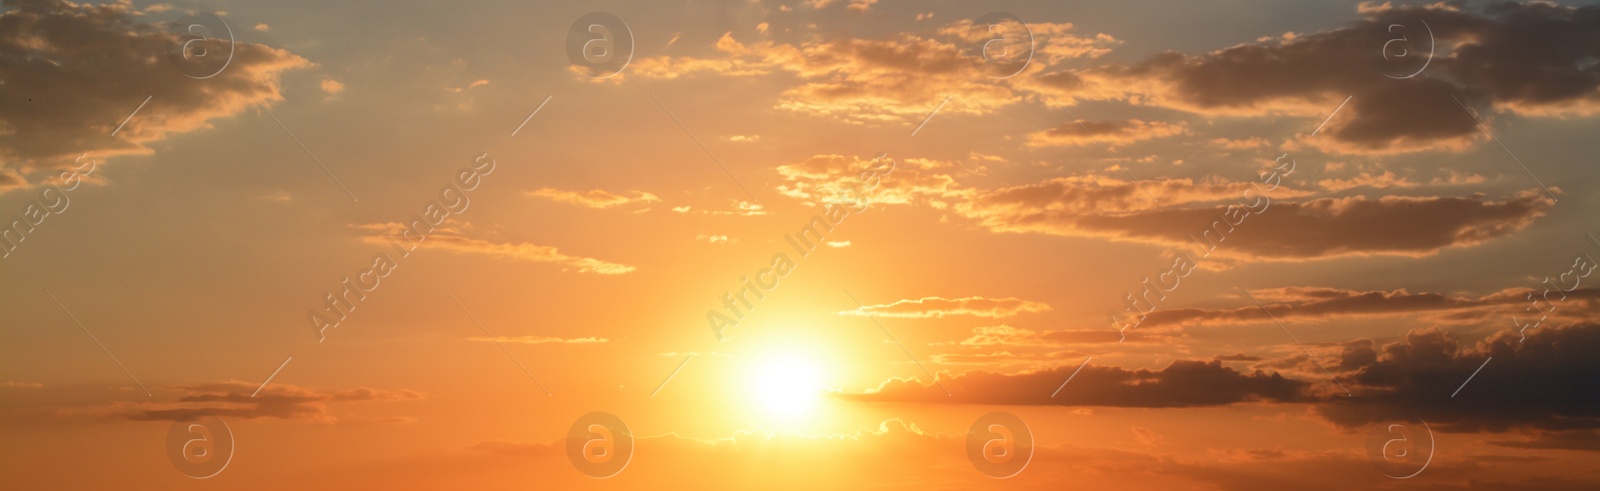 Image of Sun shining on beautiful cloudy sky at sunset, banner design